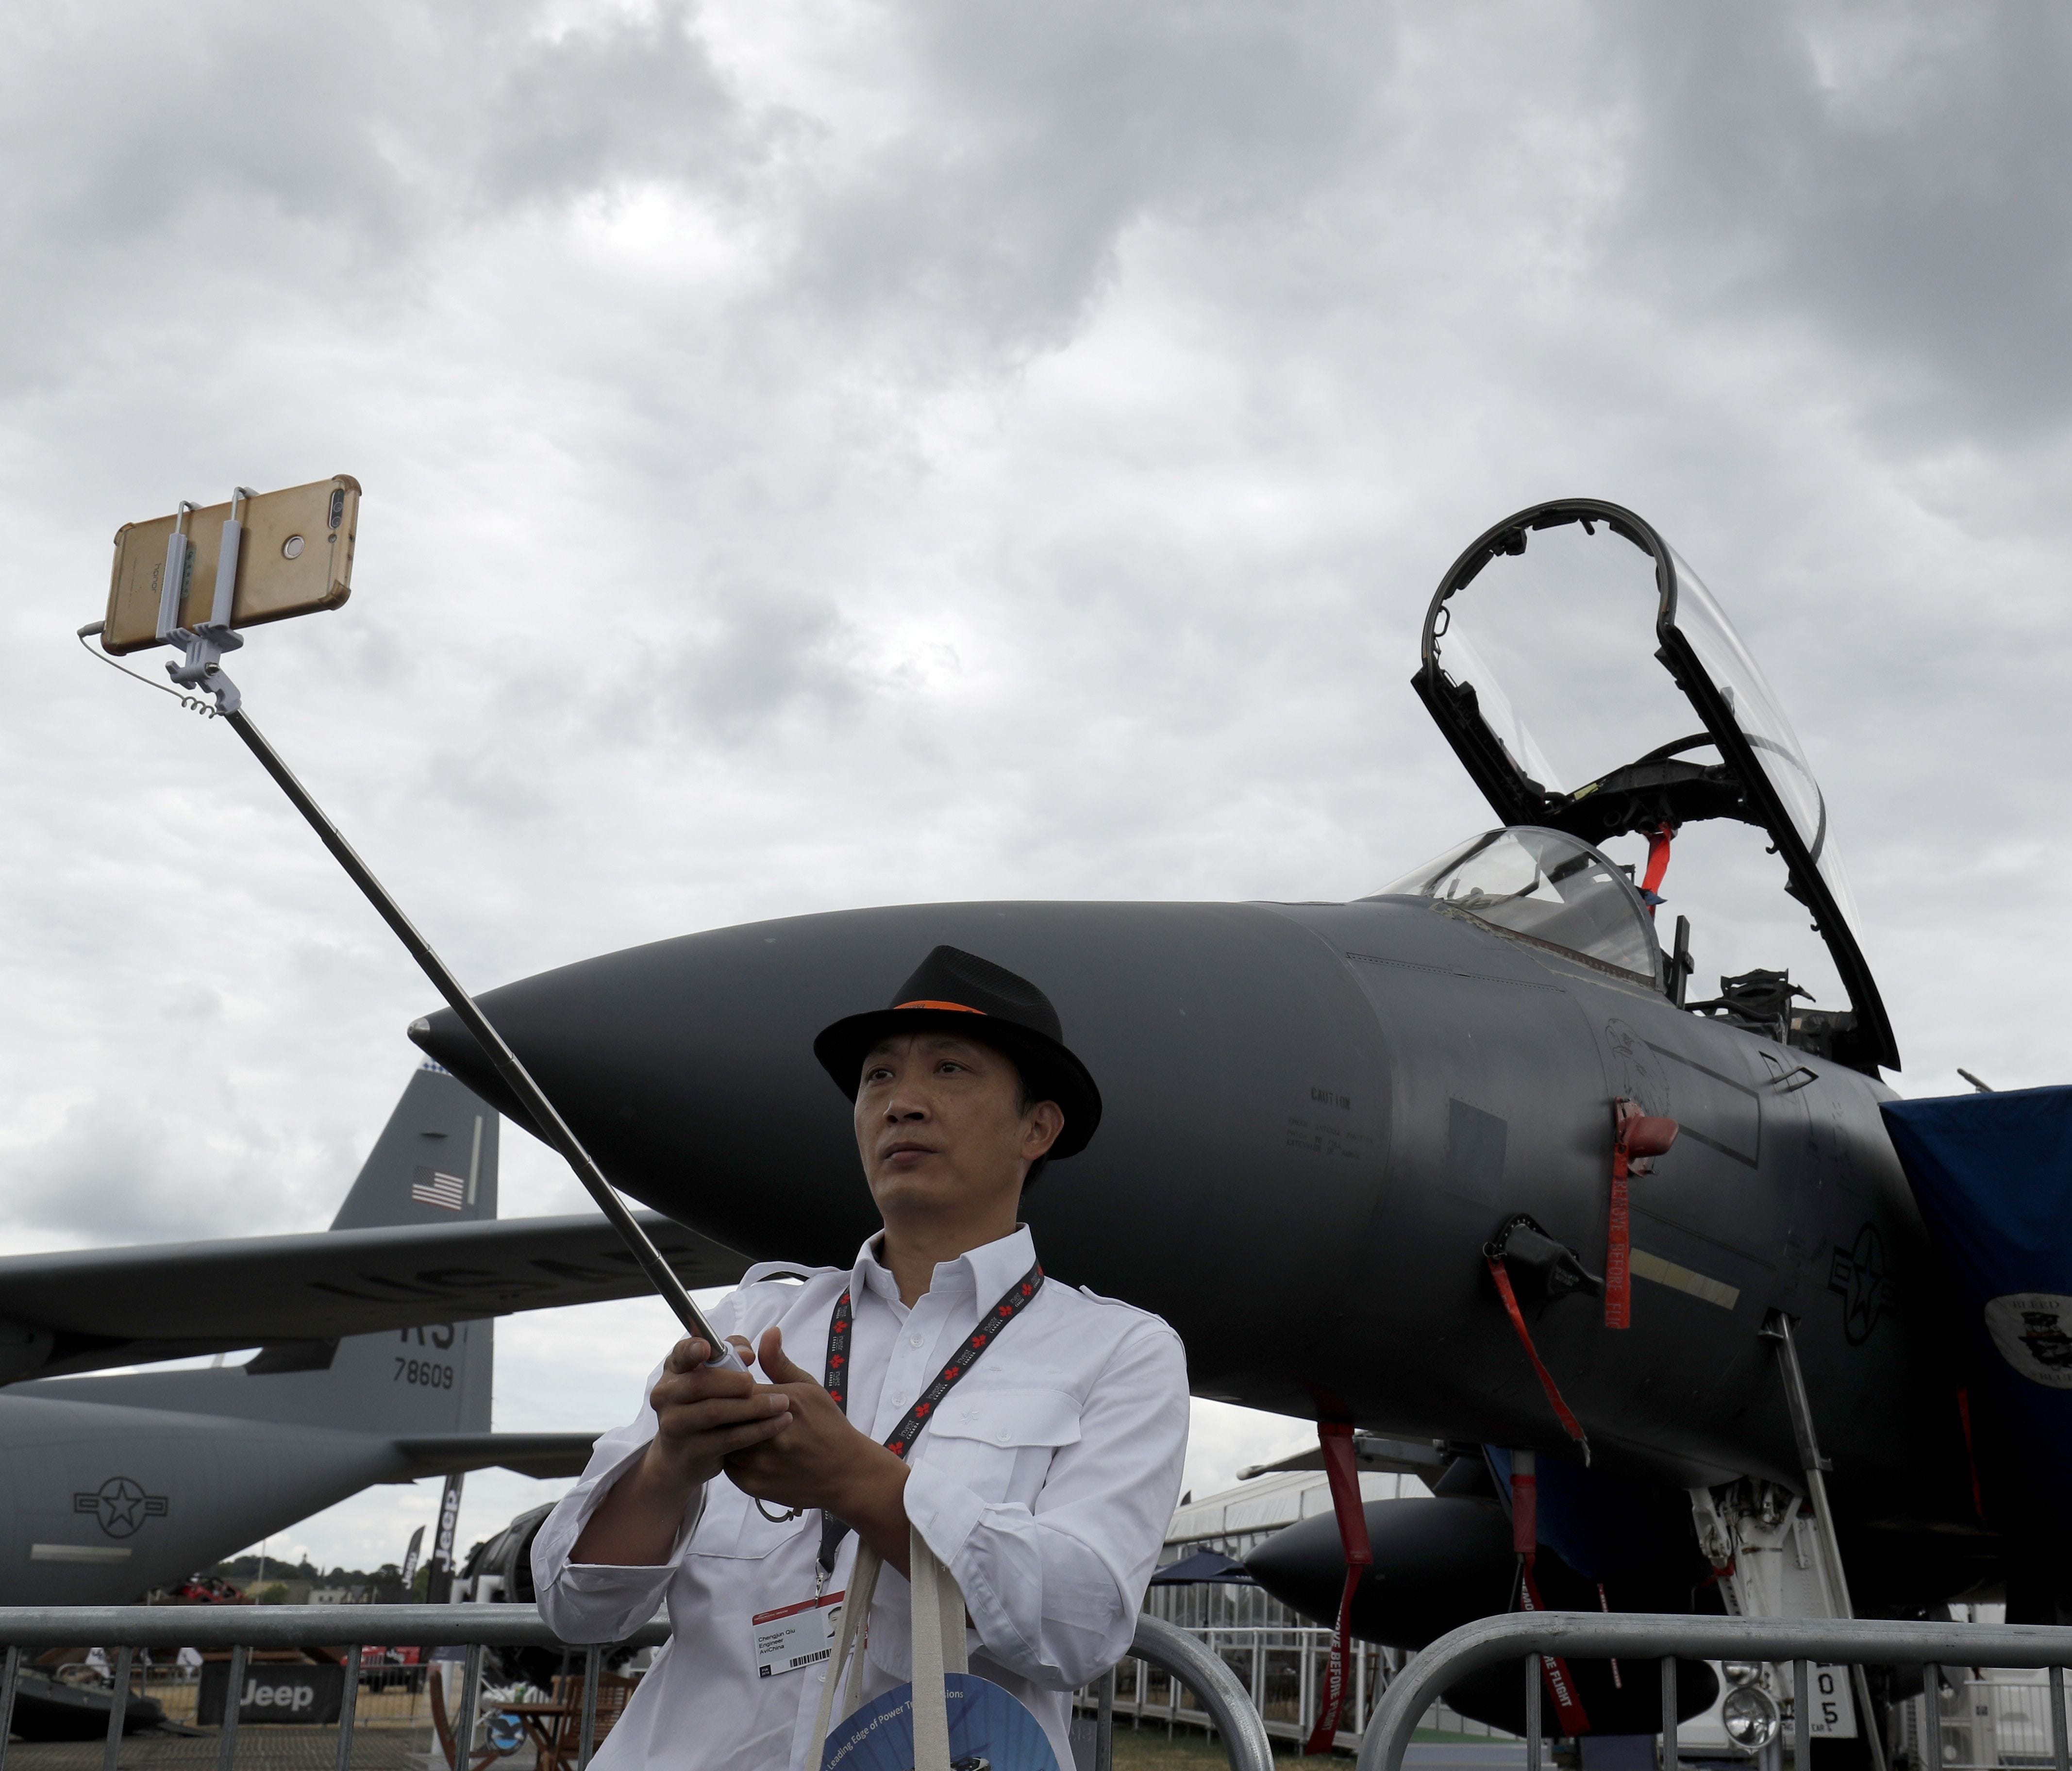 A visitor takes a selfie photograph in front of a Boeing F15E MultiRoll fighter aircraft displayed at the Farnborough Airshow on July 18, 2018.